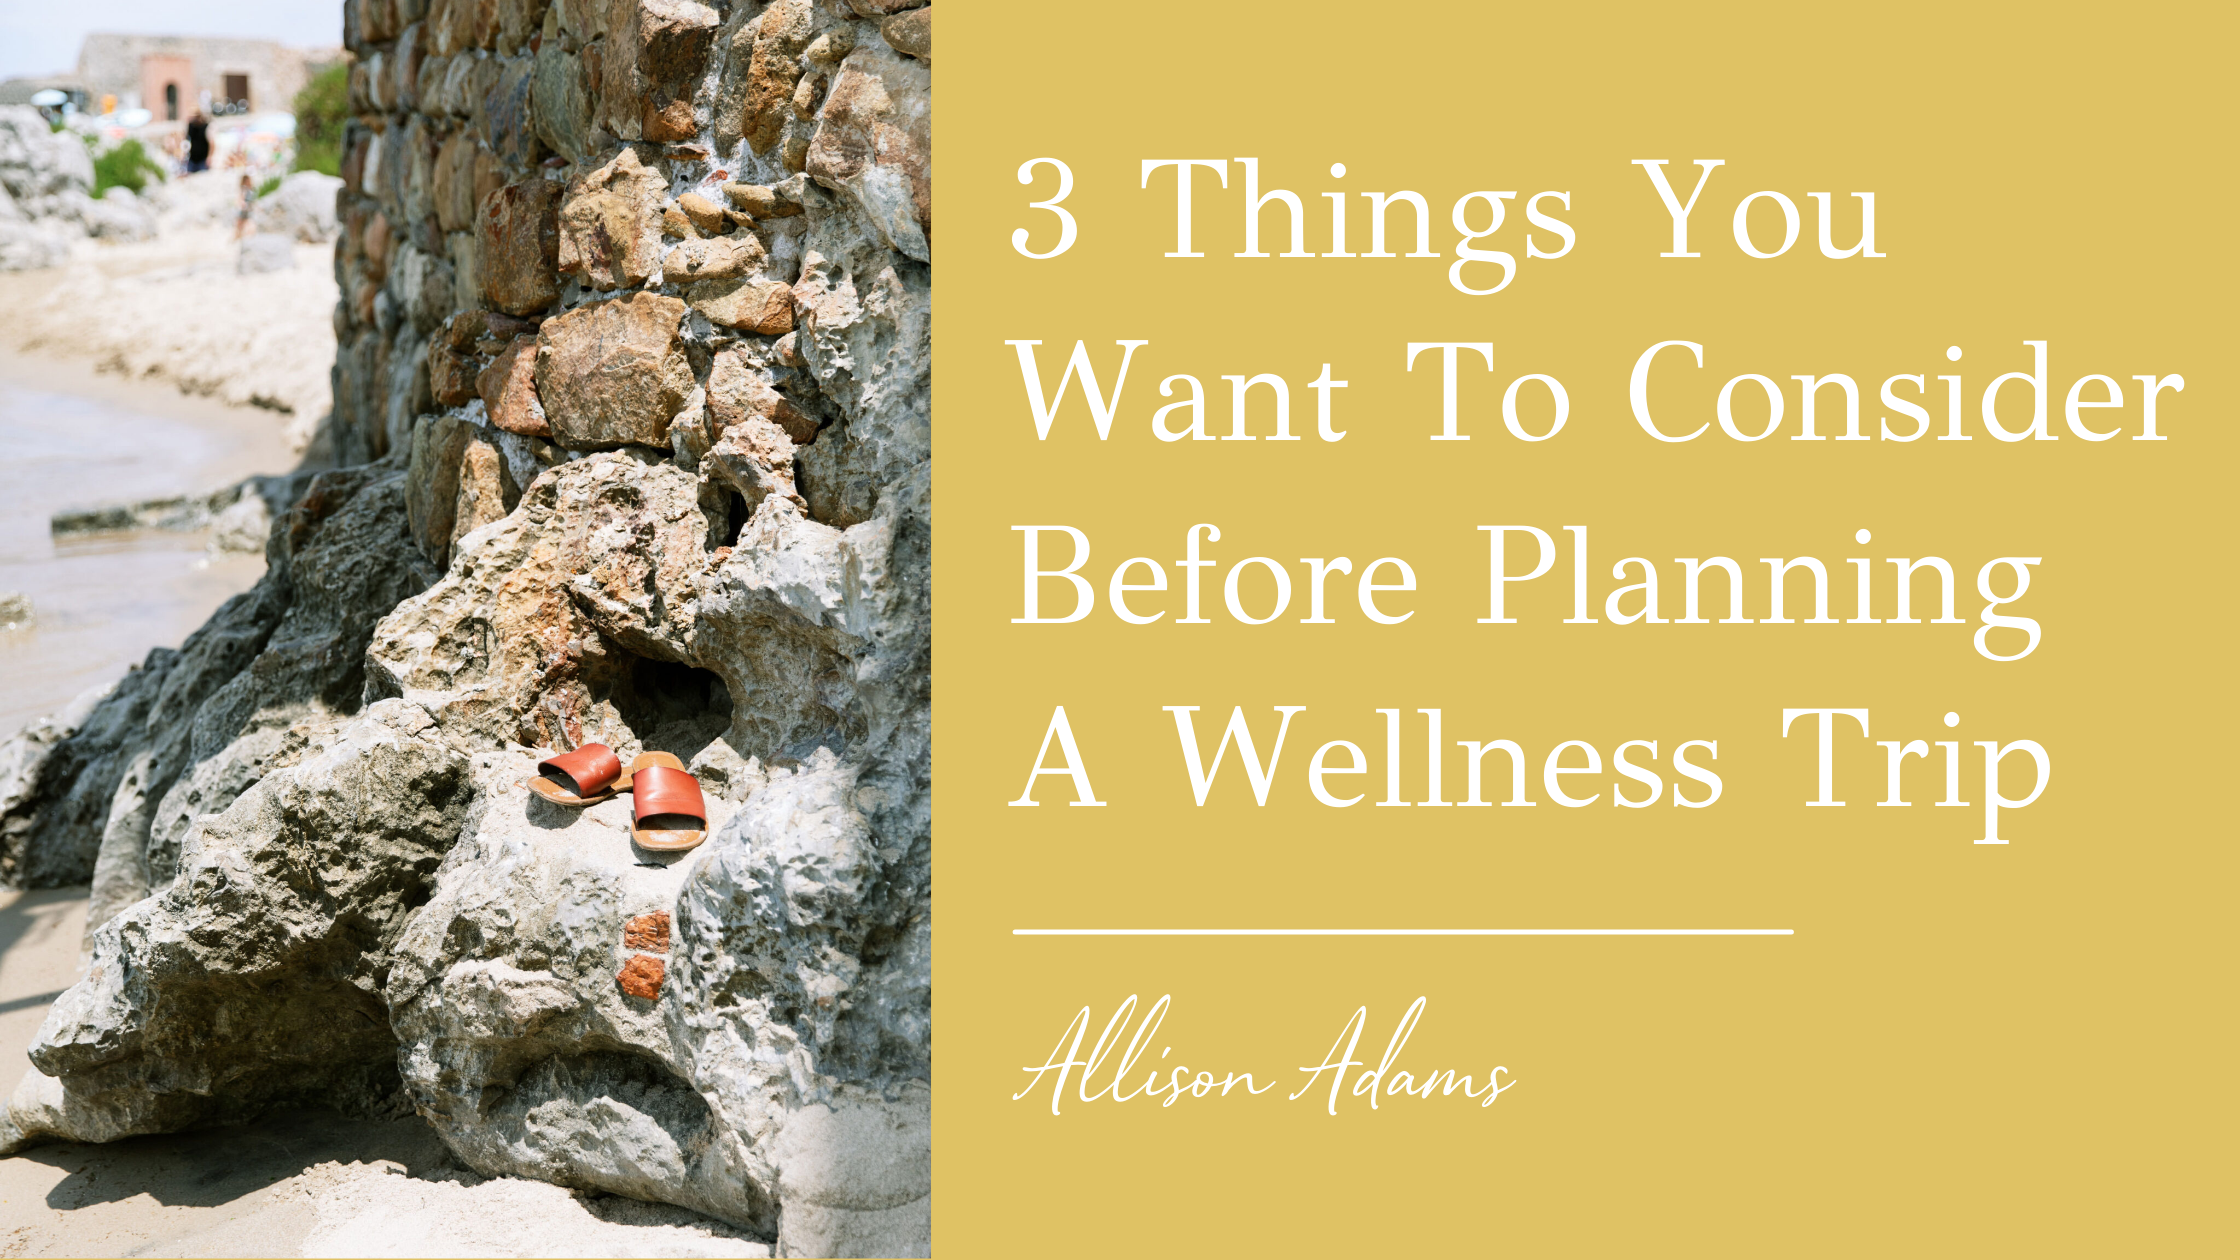 3 Things You Want To Consider Before Planning A Wellness Trip